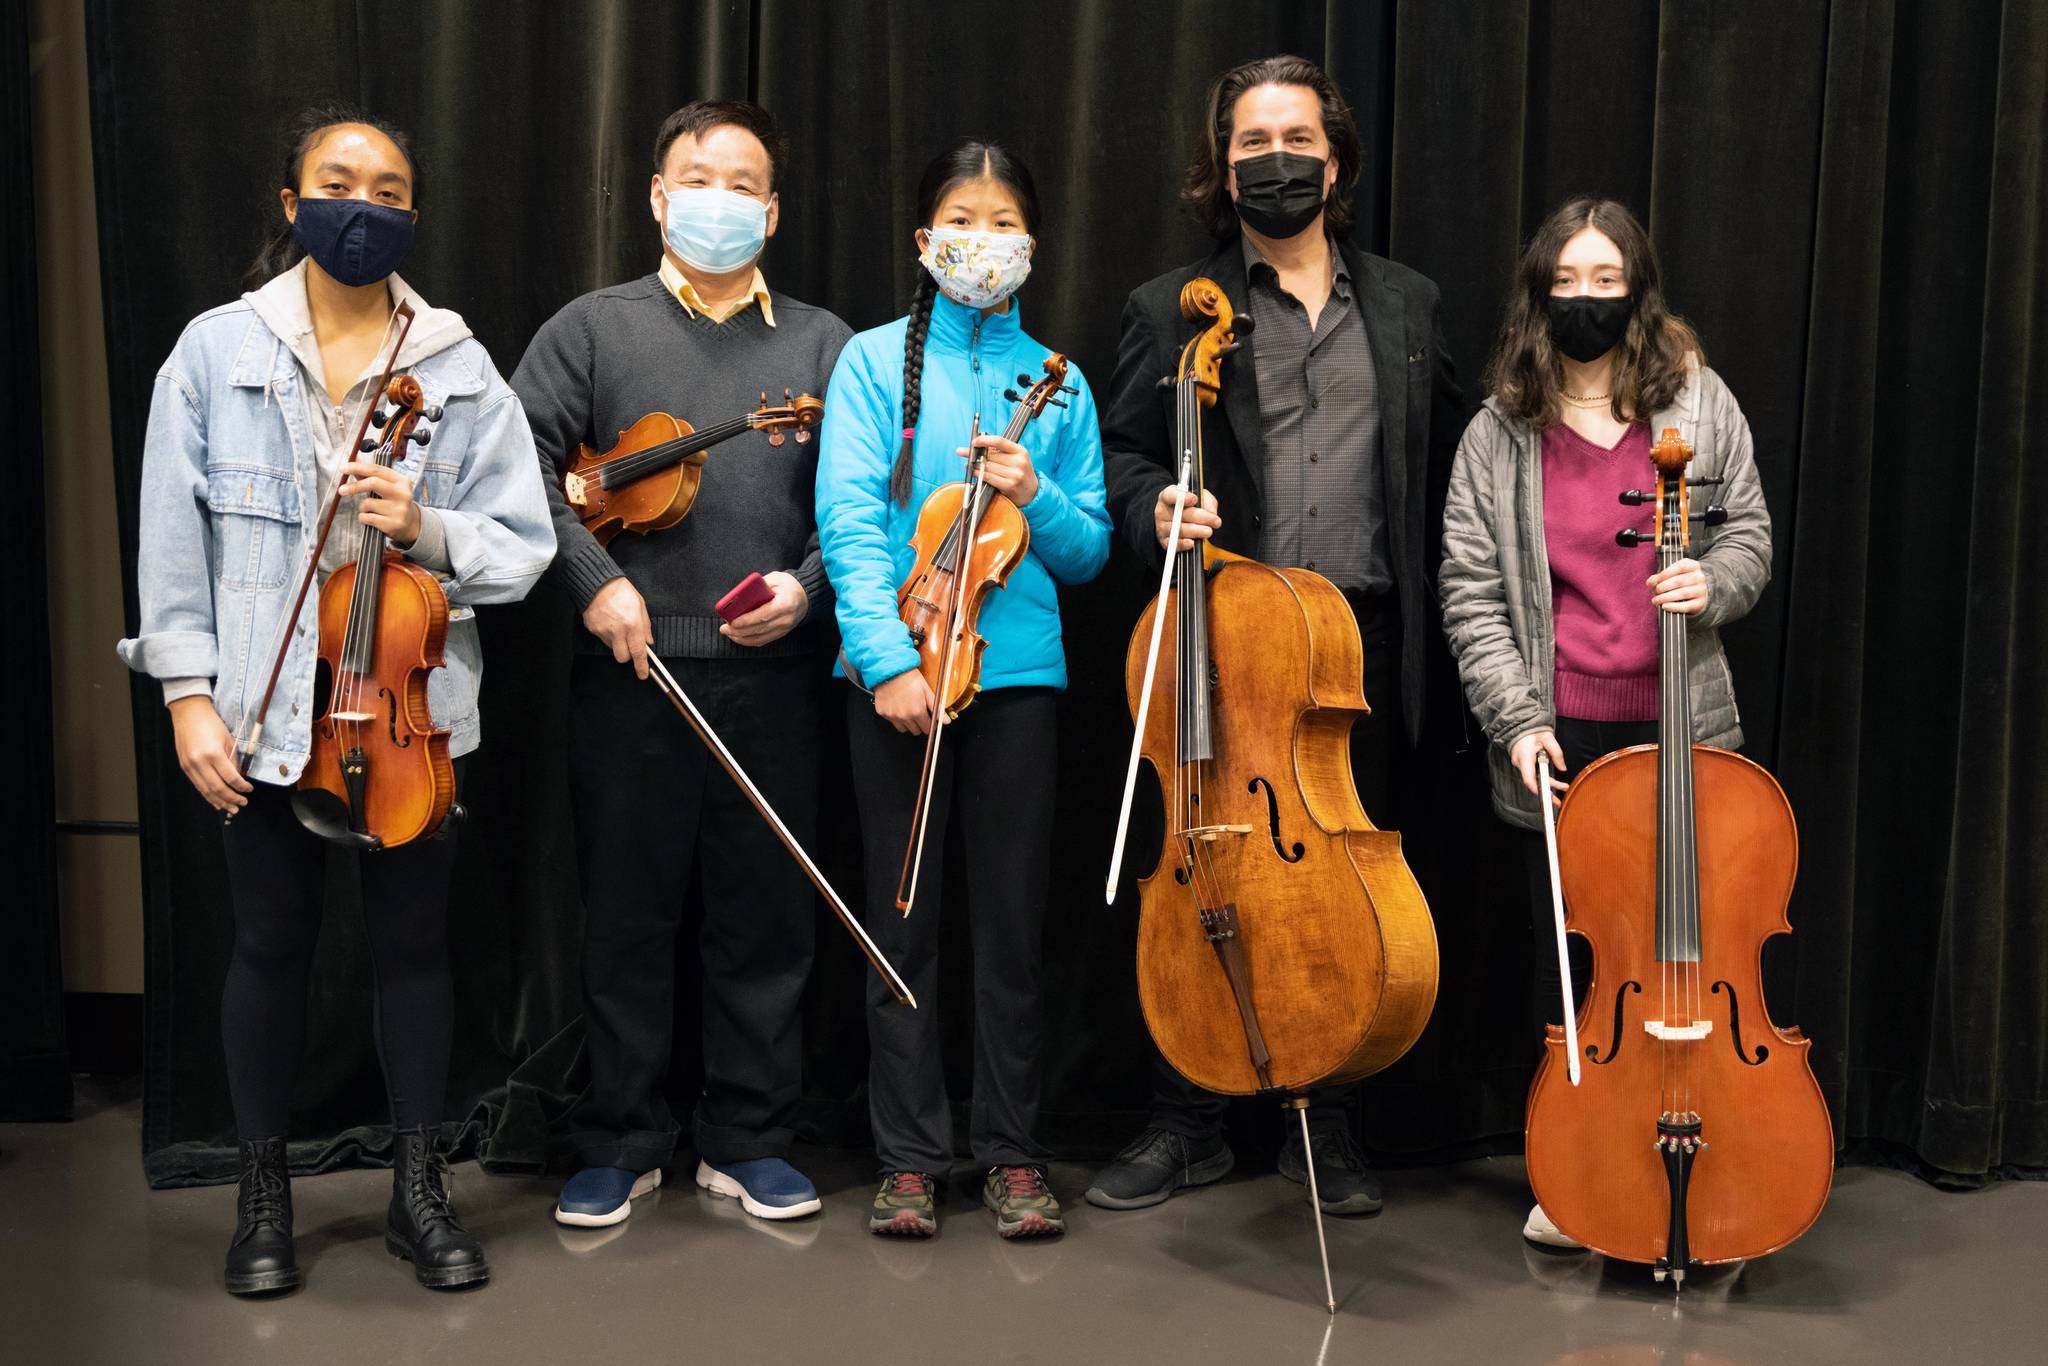 The city's COVID-19 vaccine clinics at Centennial Hall are now Juneau's premier concert venue. On April 3, local strings group Dynamics followed Grammy-award-winning cellist, Zuill Bailey in a live concert at the clinic. Jayda Skeek, far left, musical coach and teacher Guohua Xia second to the left, students Jin Yue Trousil and Creys Hudson flank Bailey from left to right. (Courtesy Photo / Jim Pfitzer)